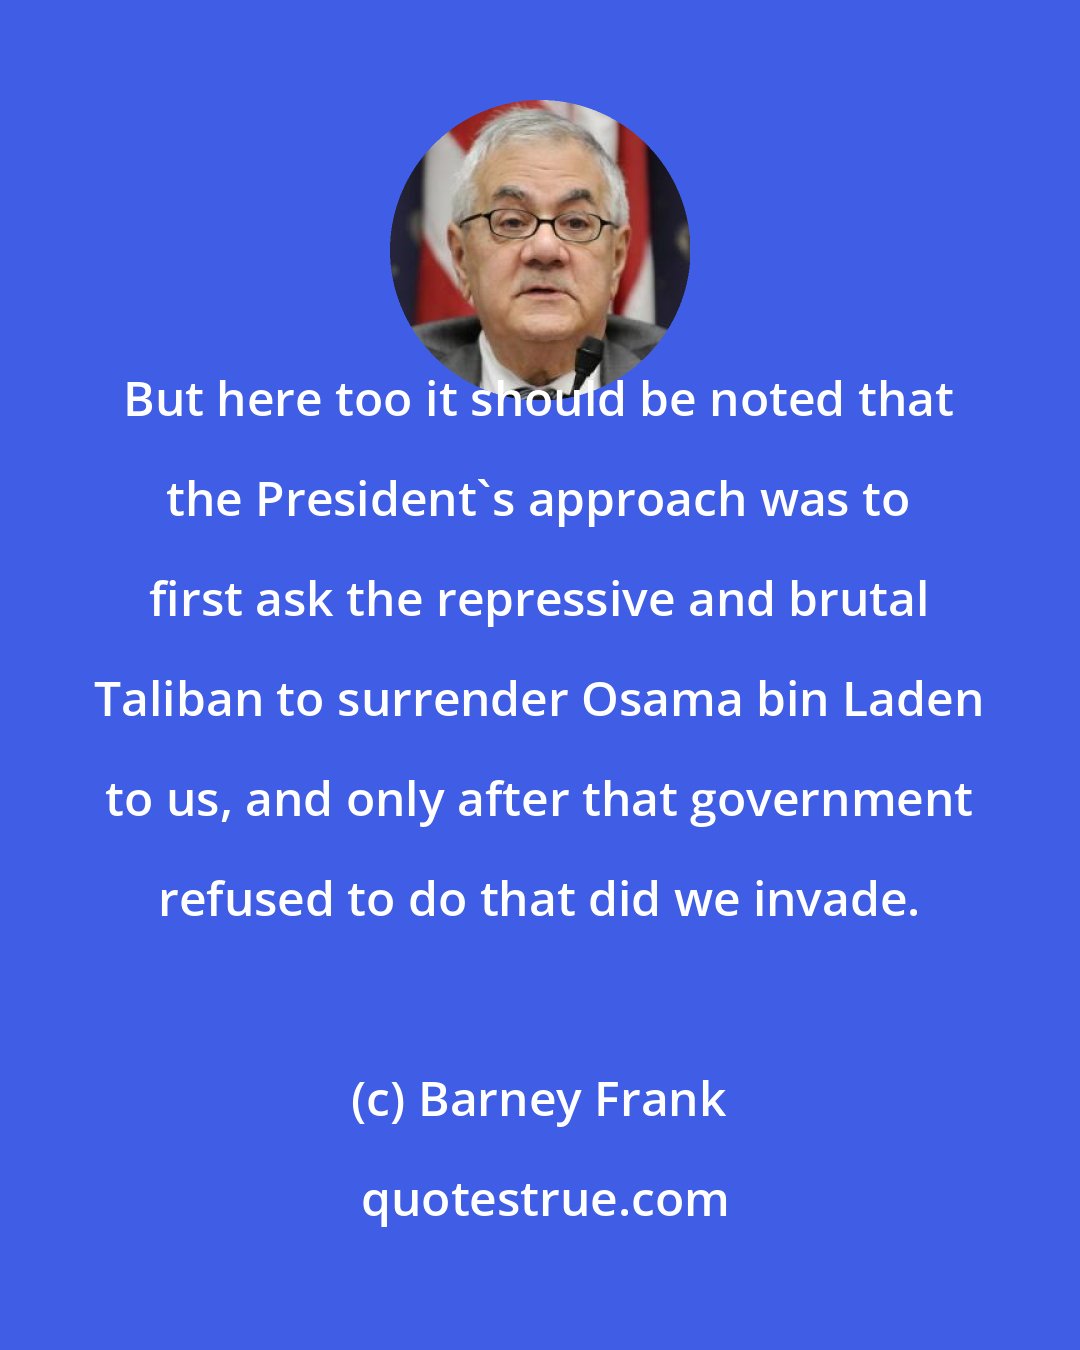 Barney Frank: But here too it should be noted that the President's approach was to first ask the repressive and brutal Taliban to surrender Osama bin Laden to us, and only after that government refused to do that did we invade.